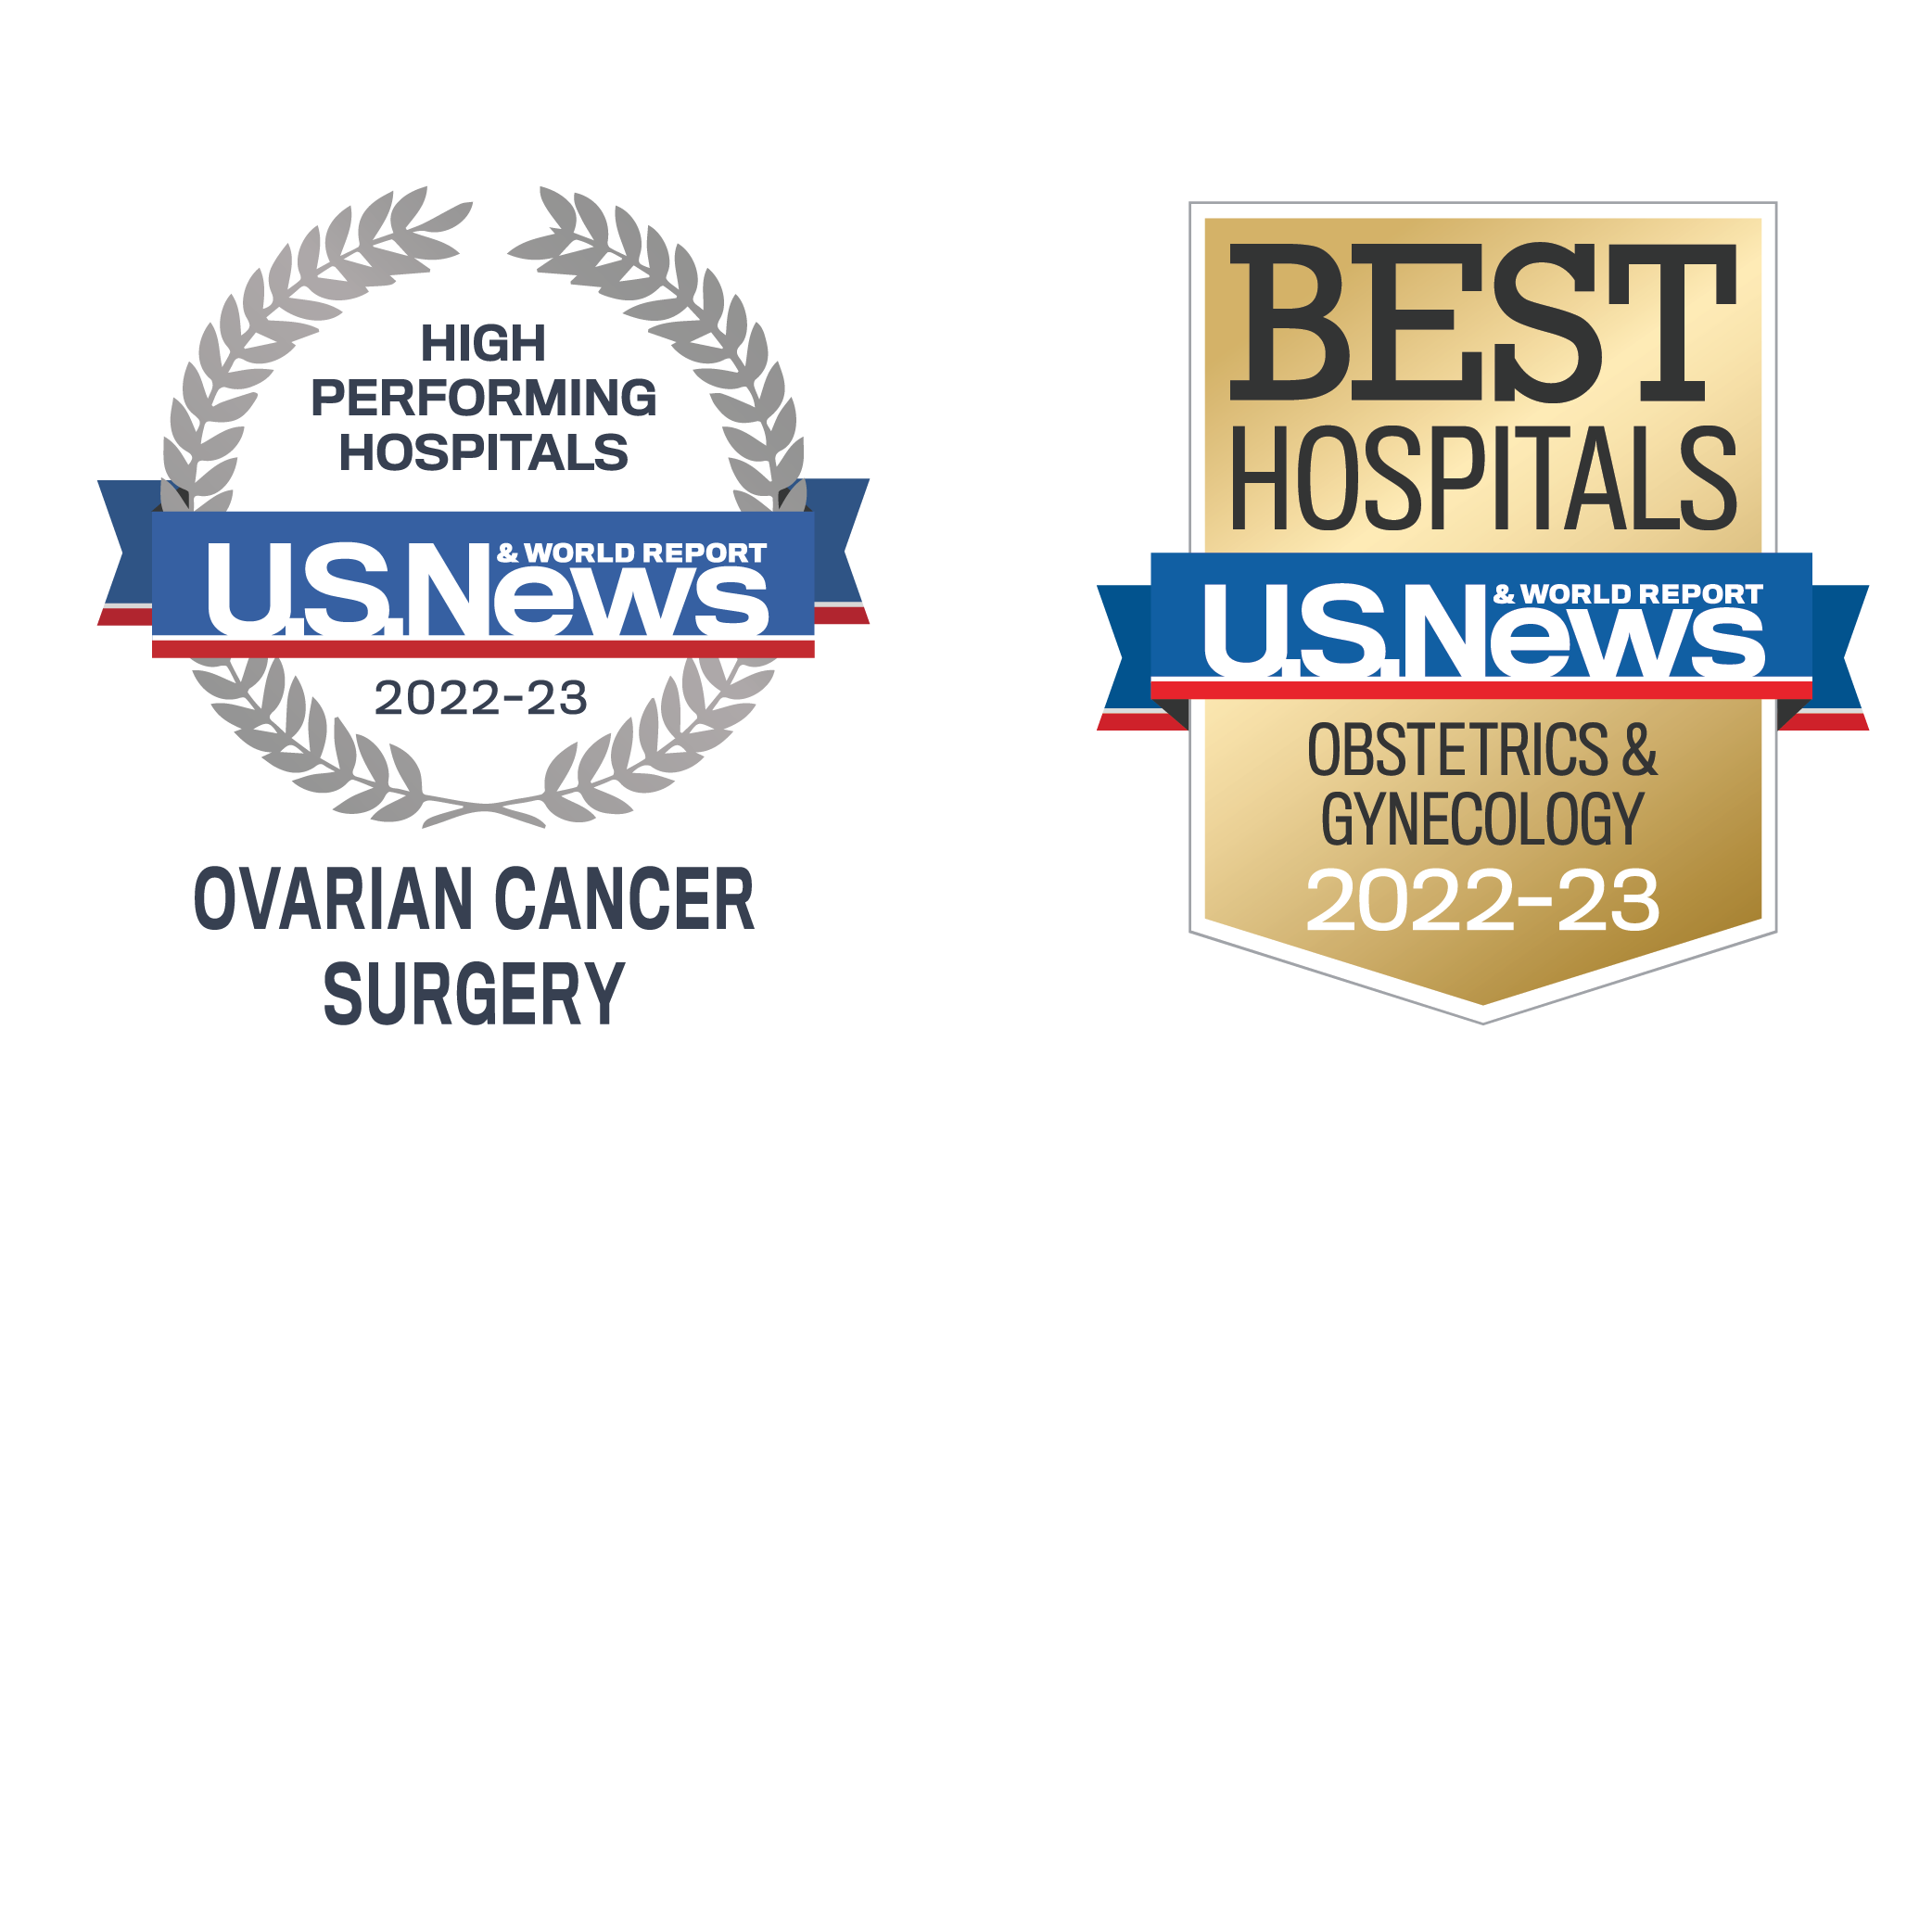 OBGYN Ranked No. 16 & High Performing in Ovarian Cancer Surgery in 2022-23 U.S. News & World Report rankings